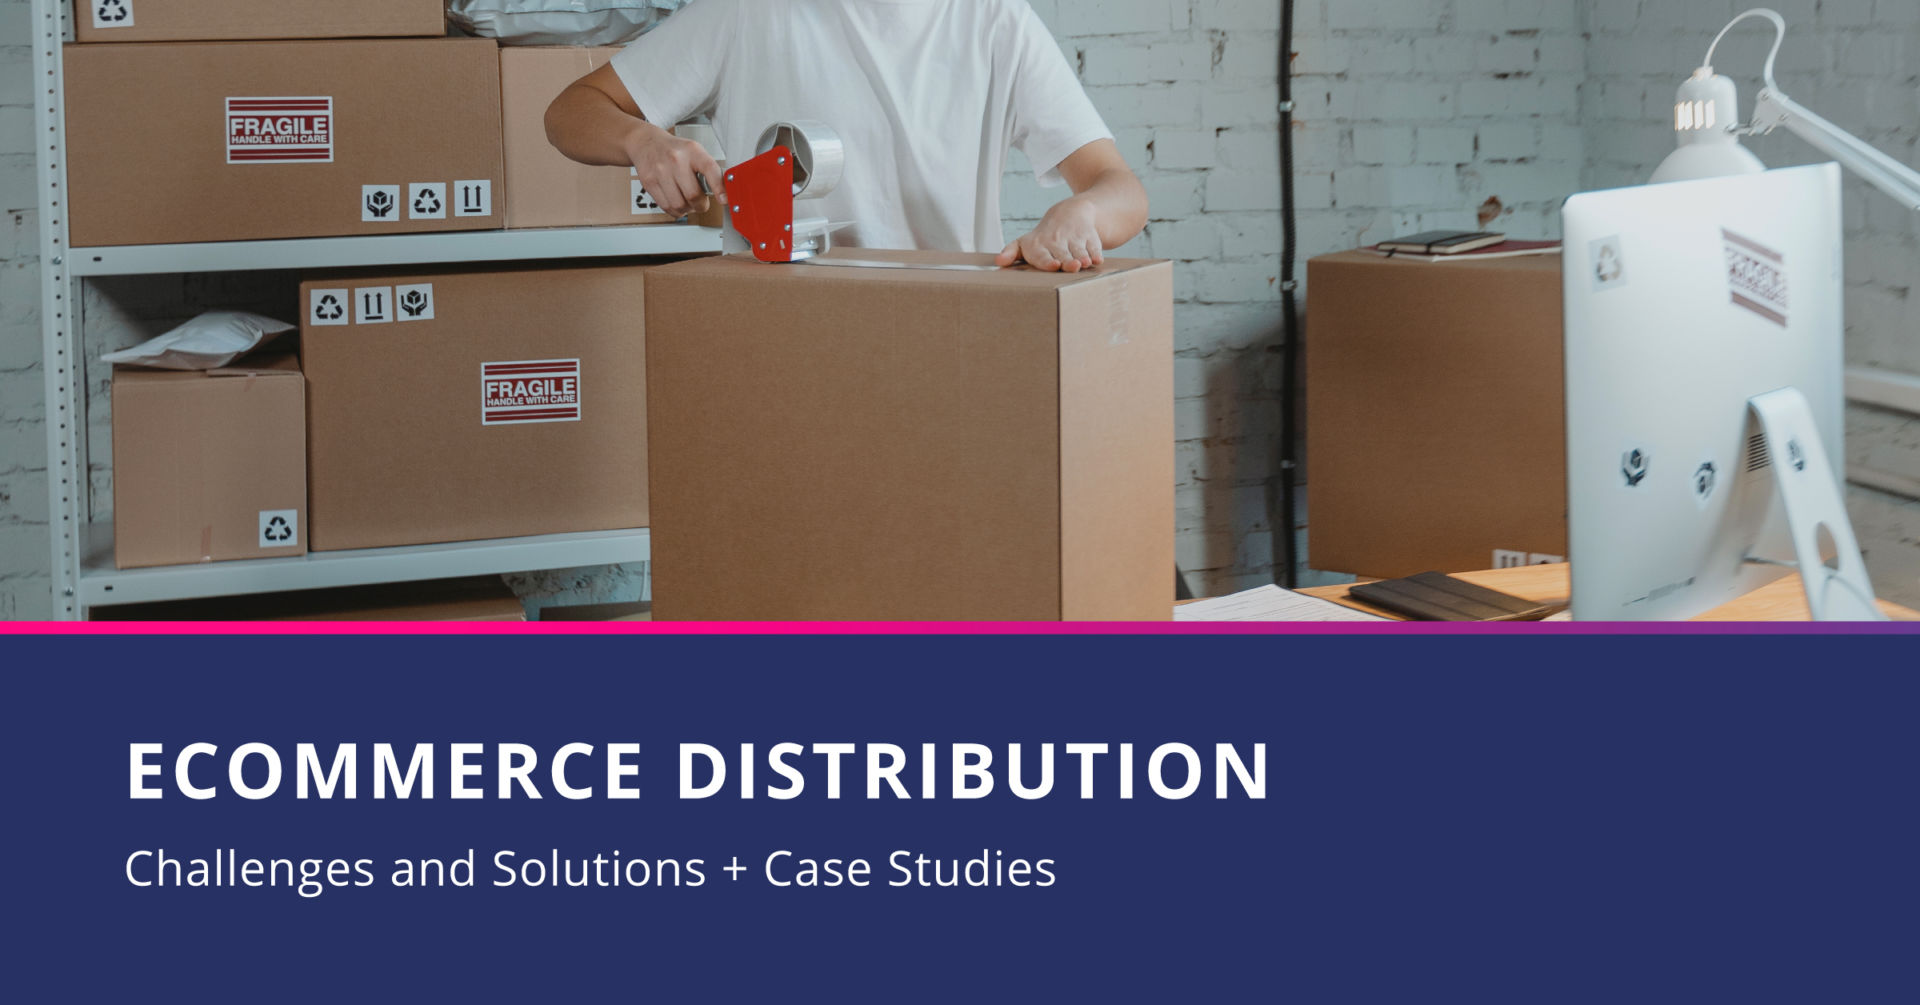 E-commerce Distribution: Challenges and Solutions + Case Studies